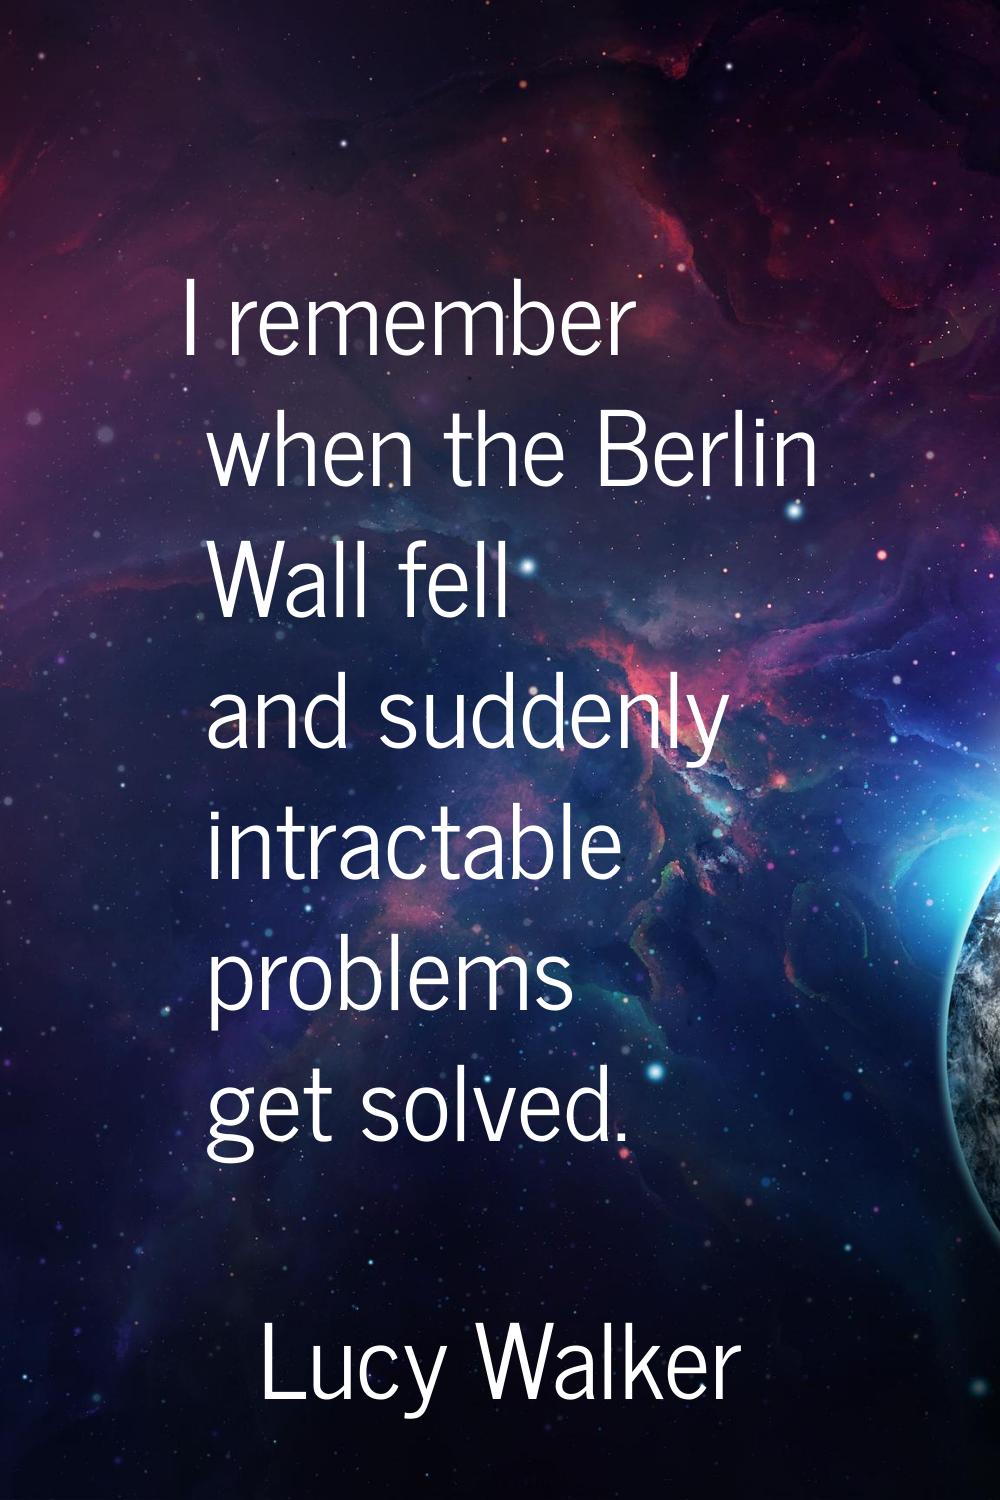 I remember when the Berlin Wall fell and suddenly intractable problems get solved.